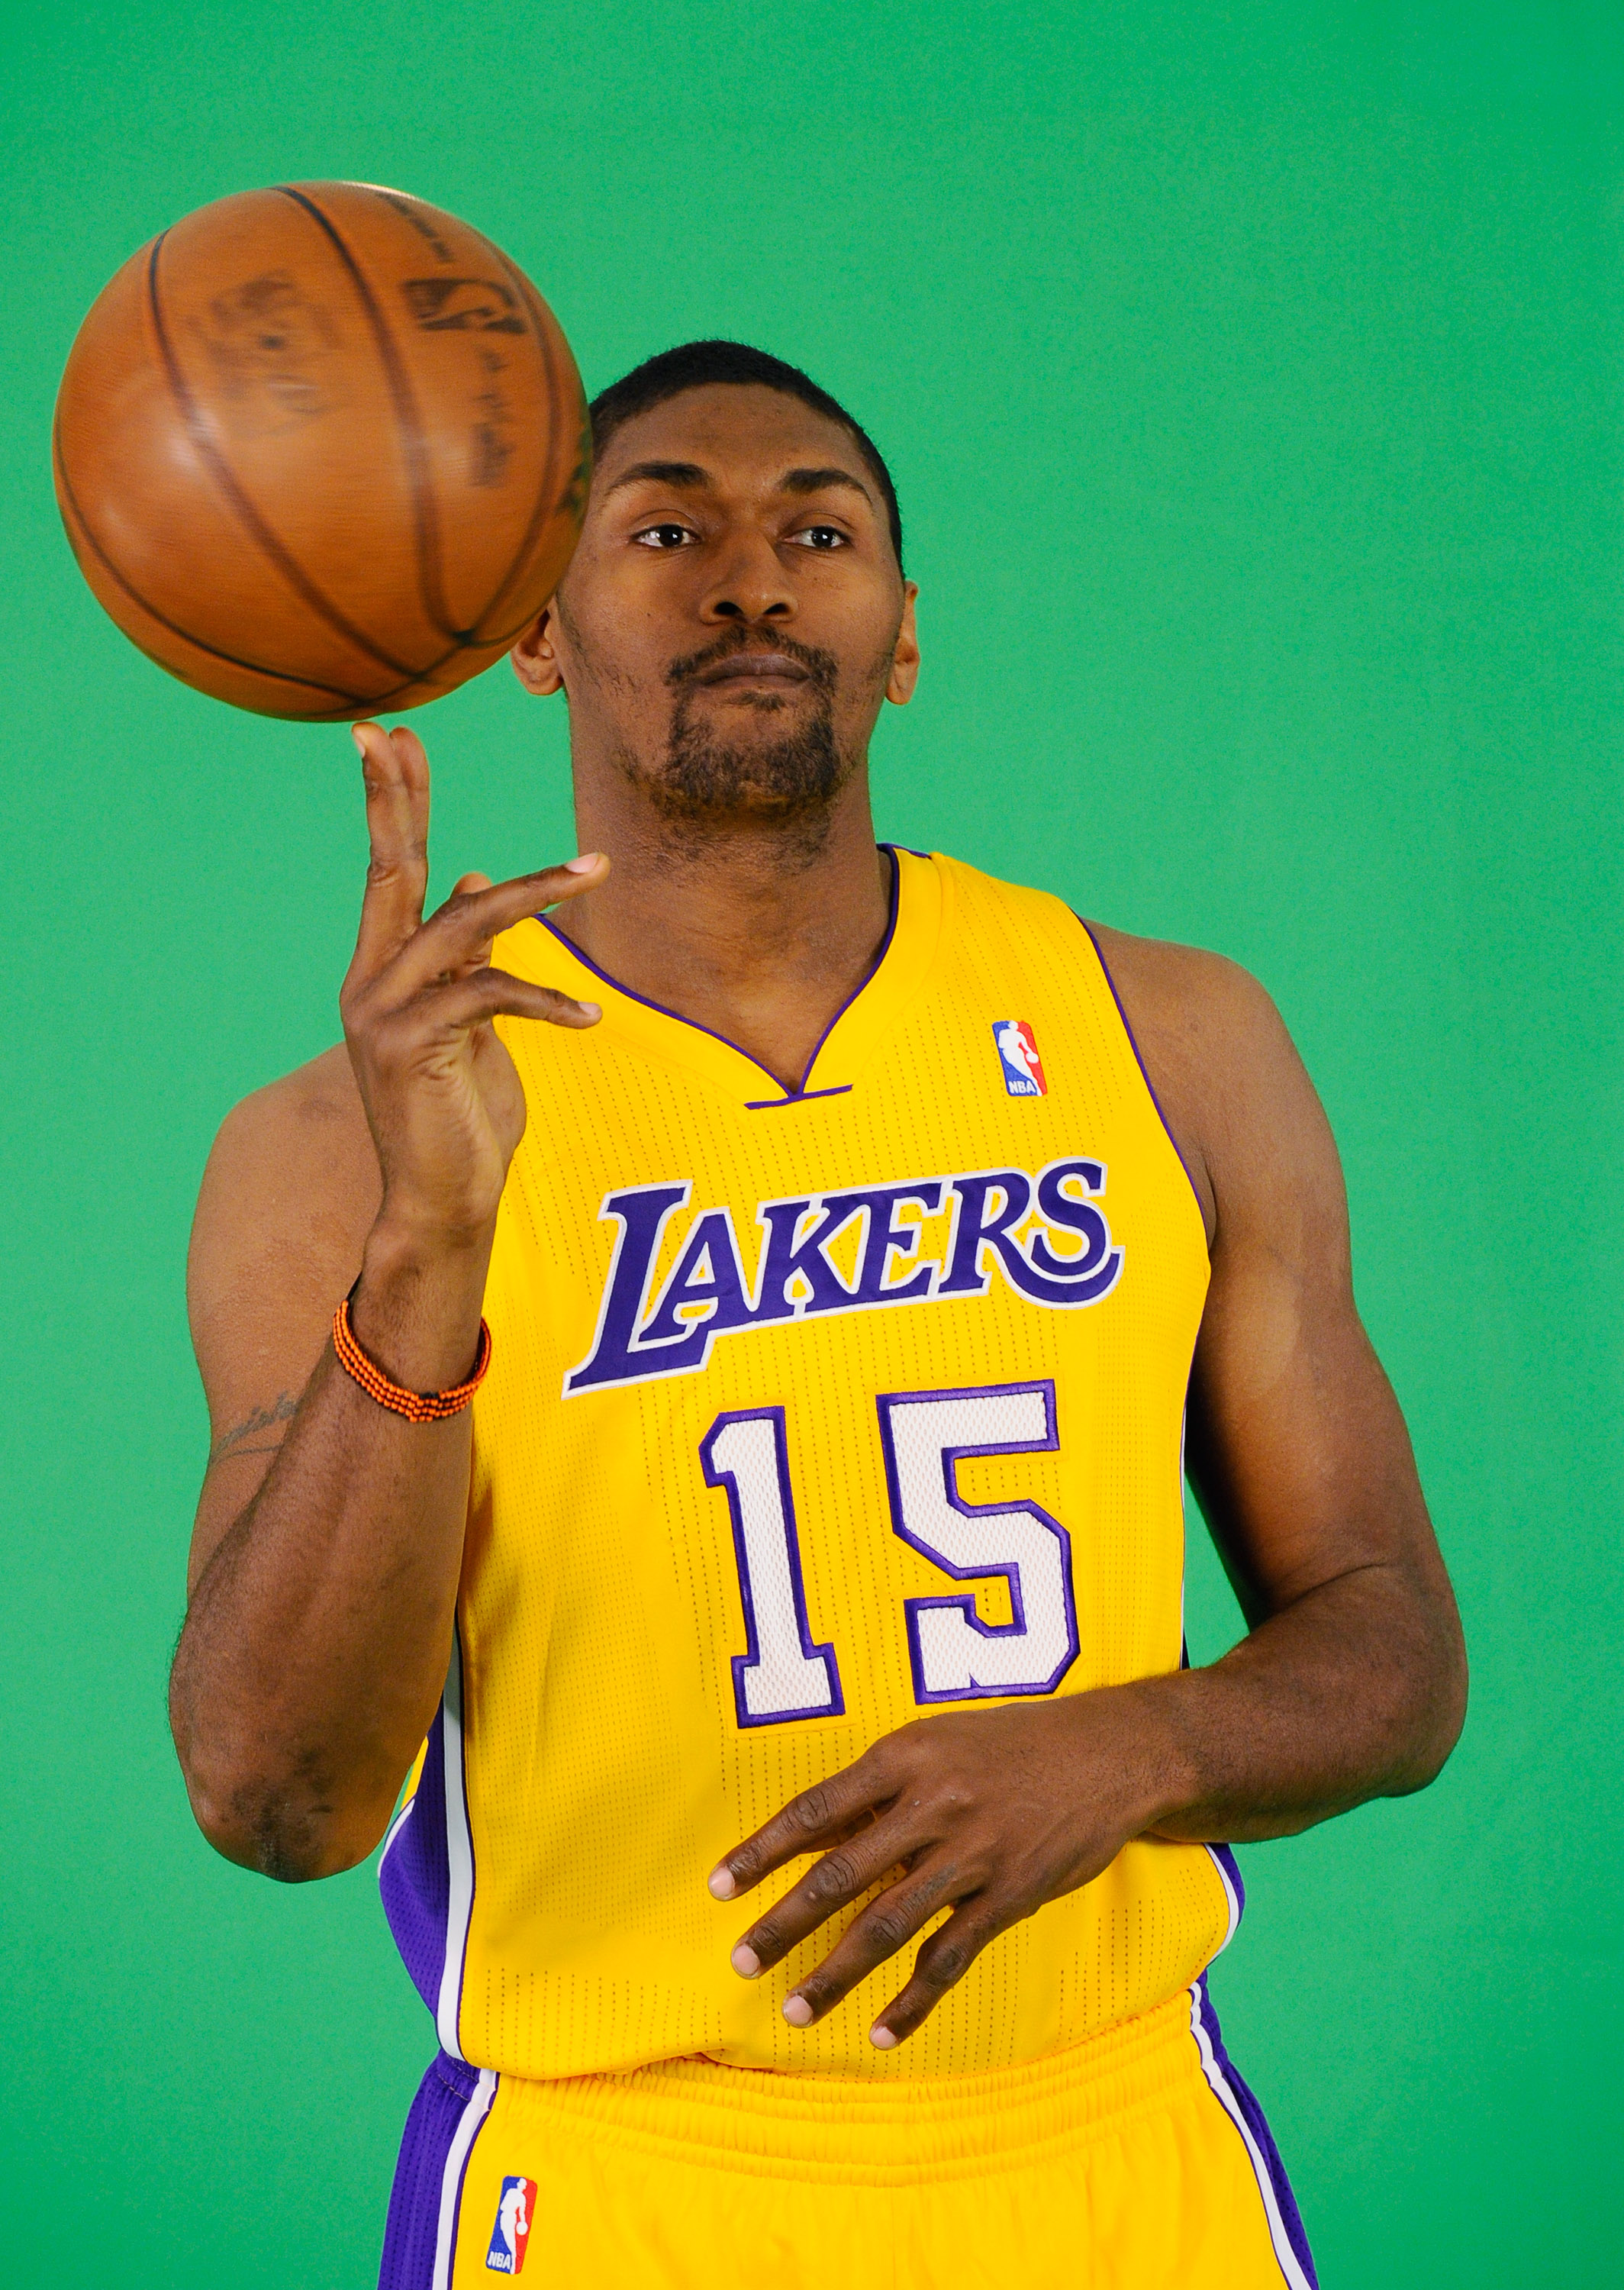 EL SEGUNDO, CA - SEPTEMBER 25:  Ron Artest #15 of the Los Angeles Lakers tapes a television segment during Media Day at the Toyota Center on September 25, 2010 in El Segundo, California. NOTE TO USER: User expressly acknowledges and agrees that, by downlo